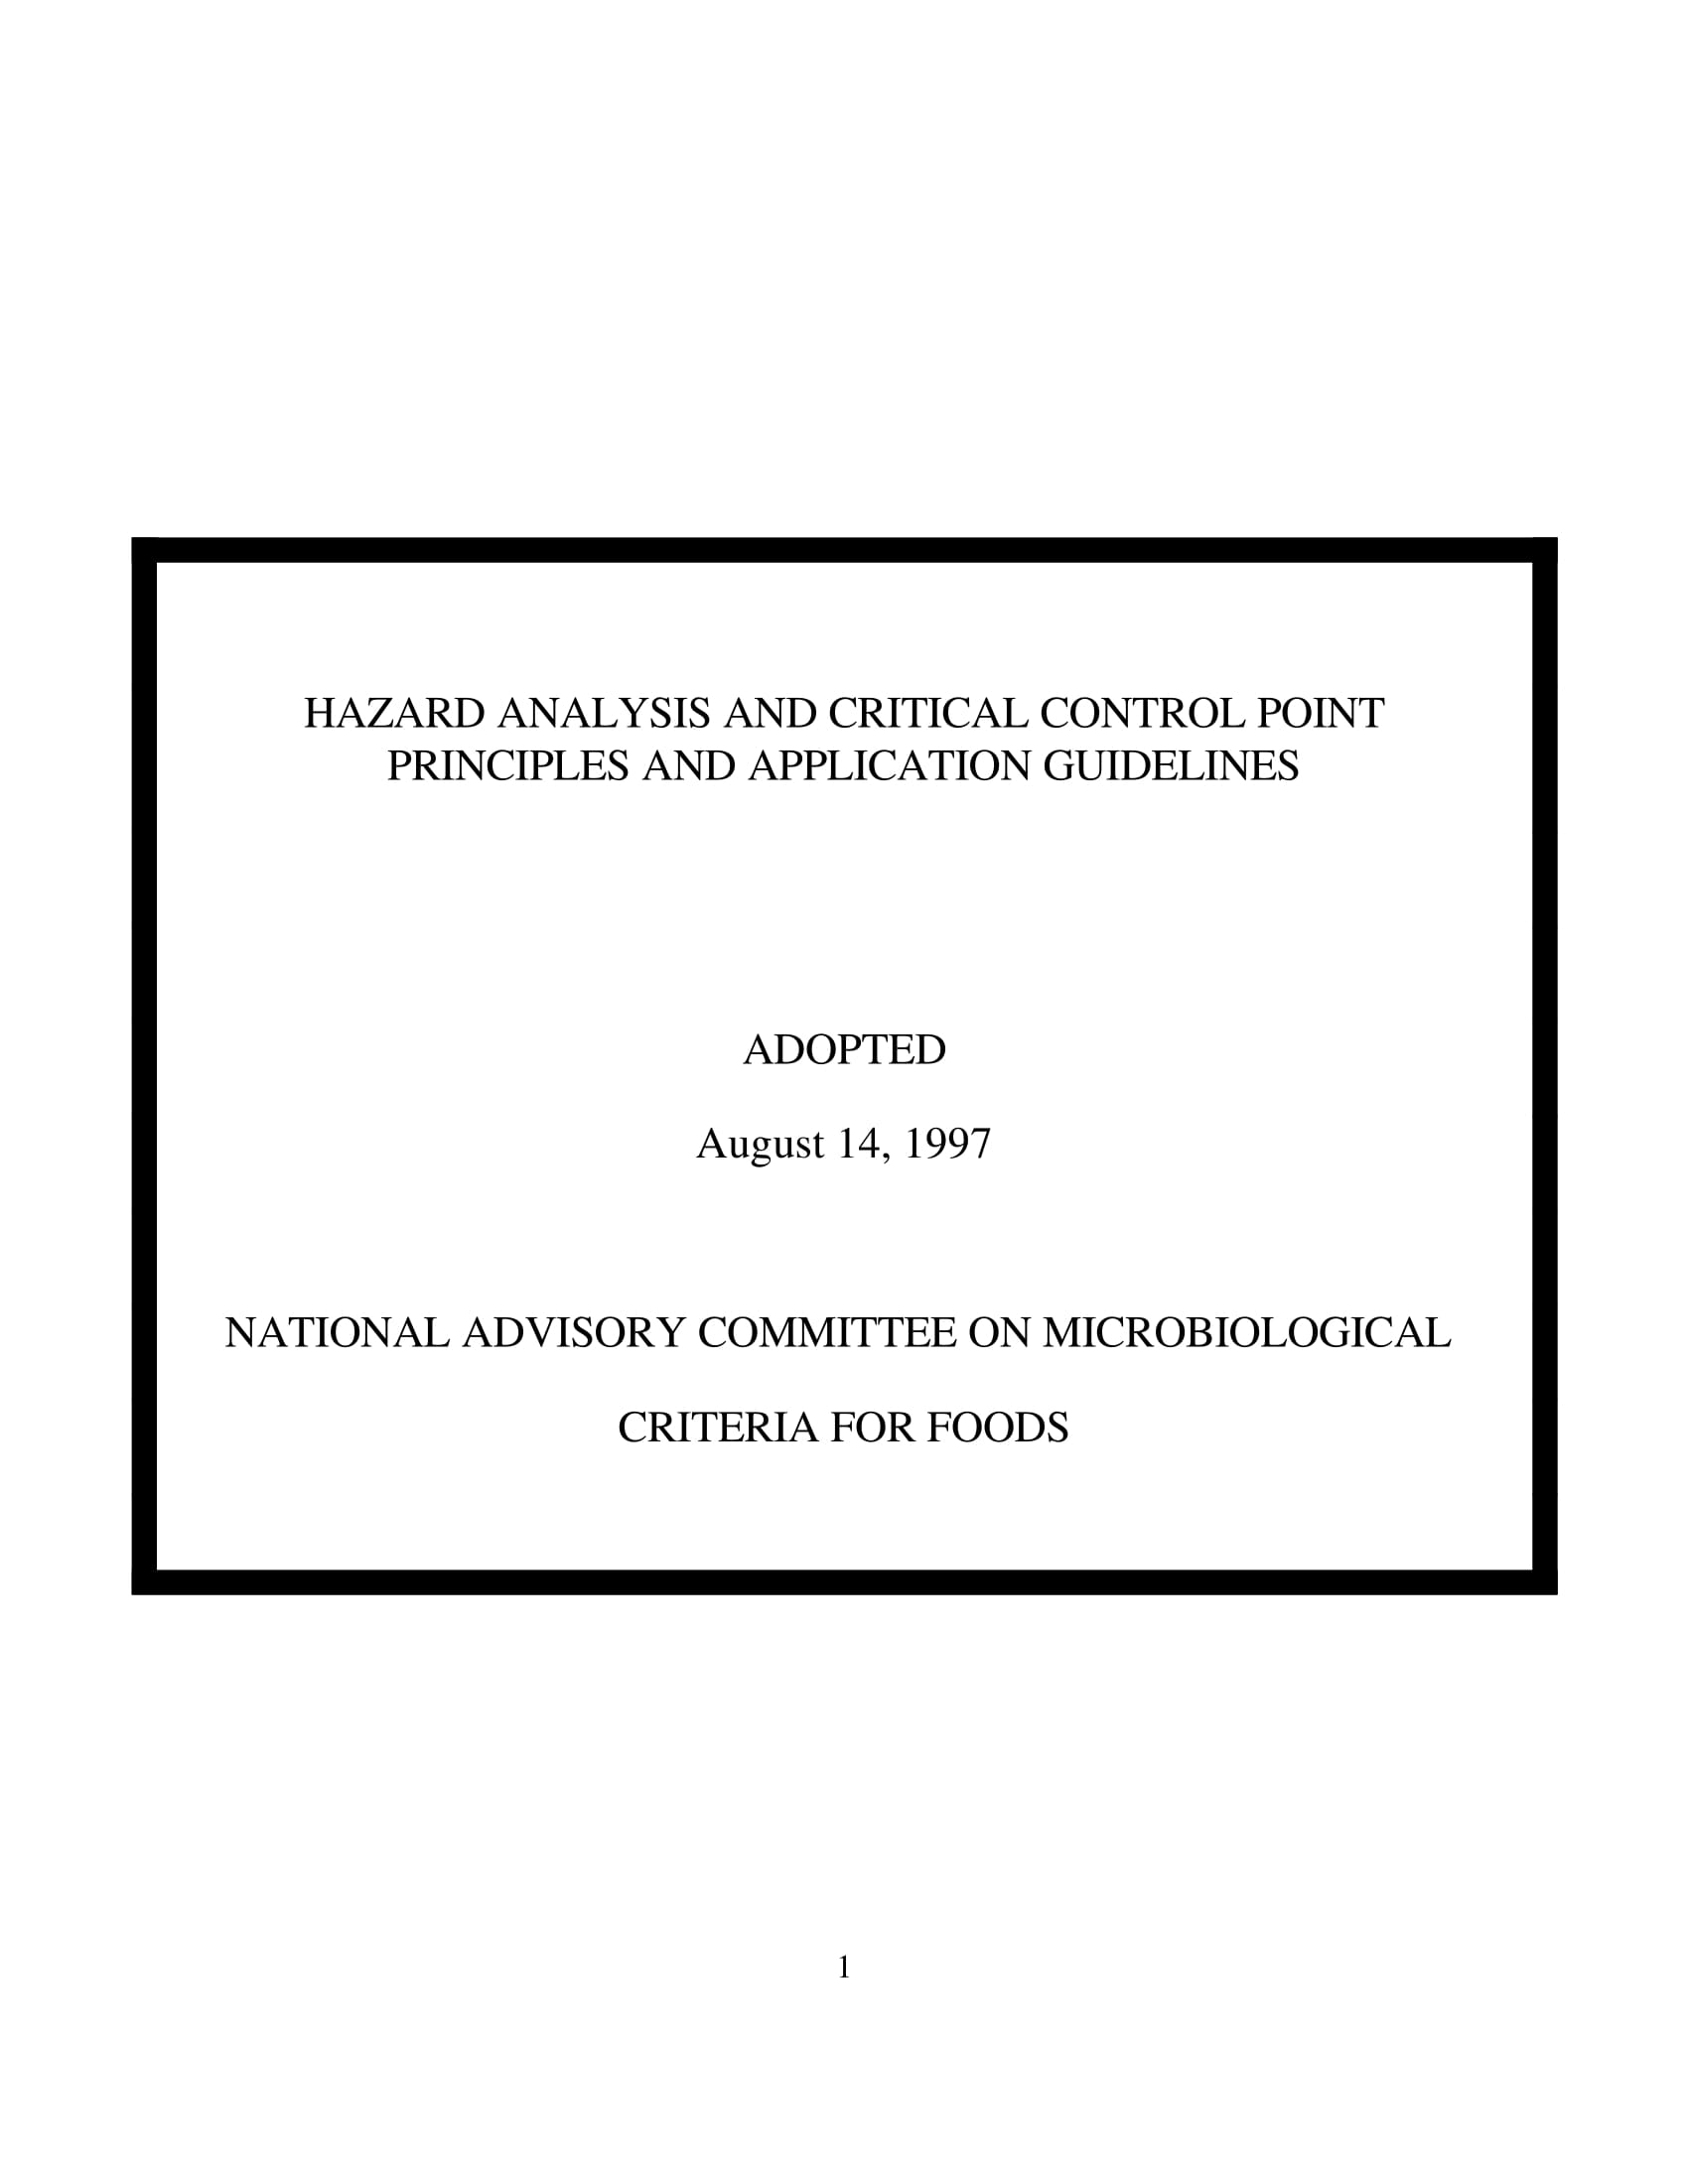 hazard analysis and critical control point principles and application guidelines 01